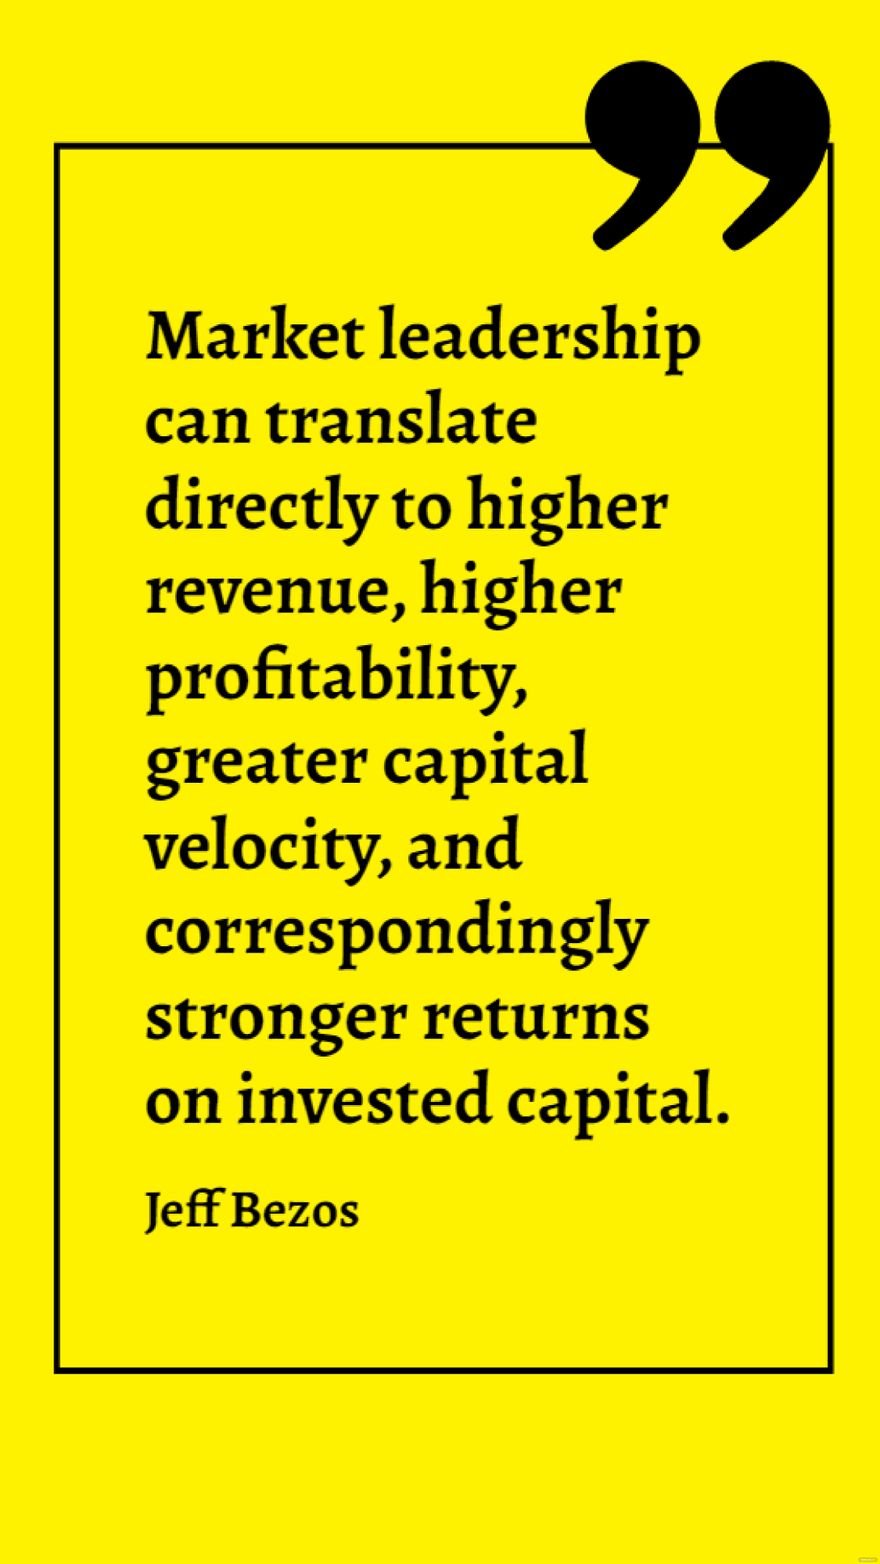 Jeff Bezos - Market leadership can translate directly to higher revenue, higher profitability, greater capital velocity, and correspondingly stronger returns on invested capital.